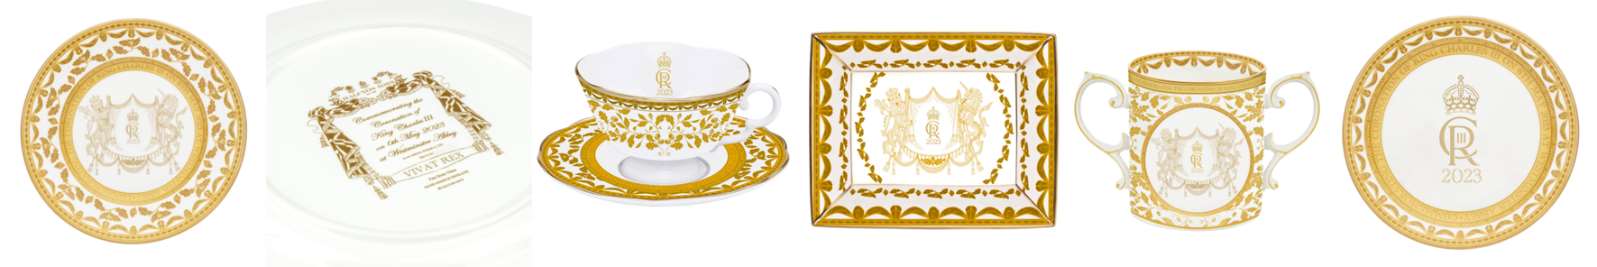 From left: A Halcyon Days coronation gold 10” presentation plate, coronation gold fluted teacup and saucer, coronation cold trinket tray, coronation gold loving cup and coronation gold coaster (Halcyon Days/PA)